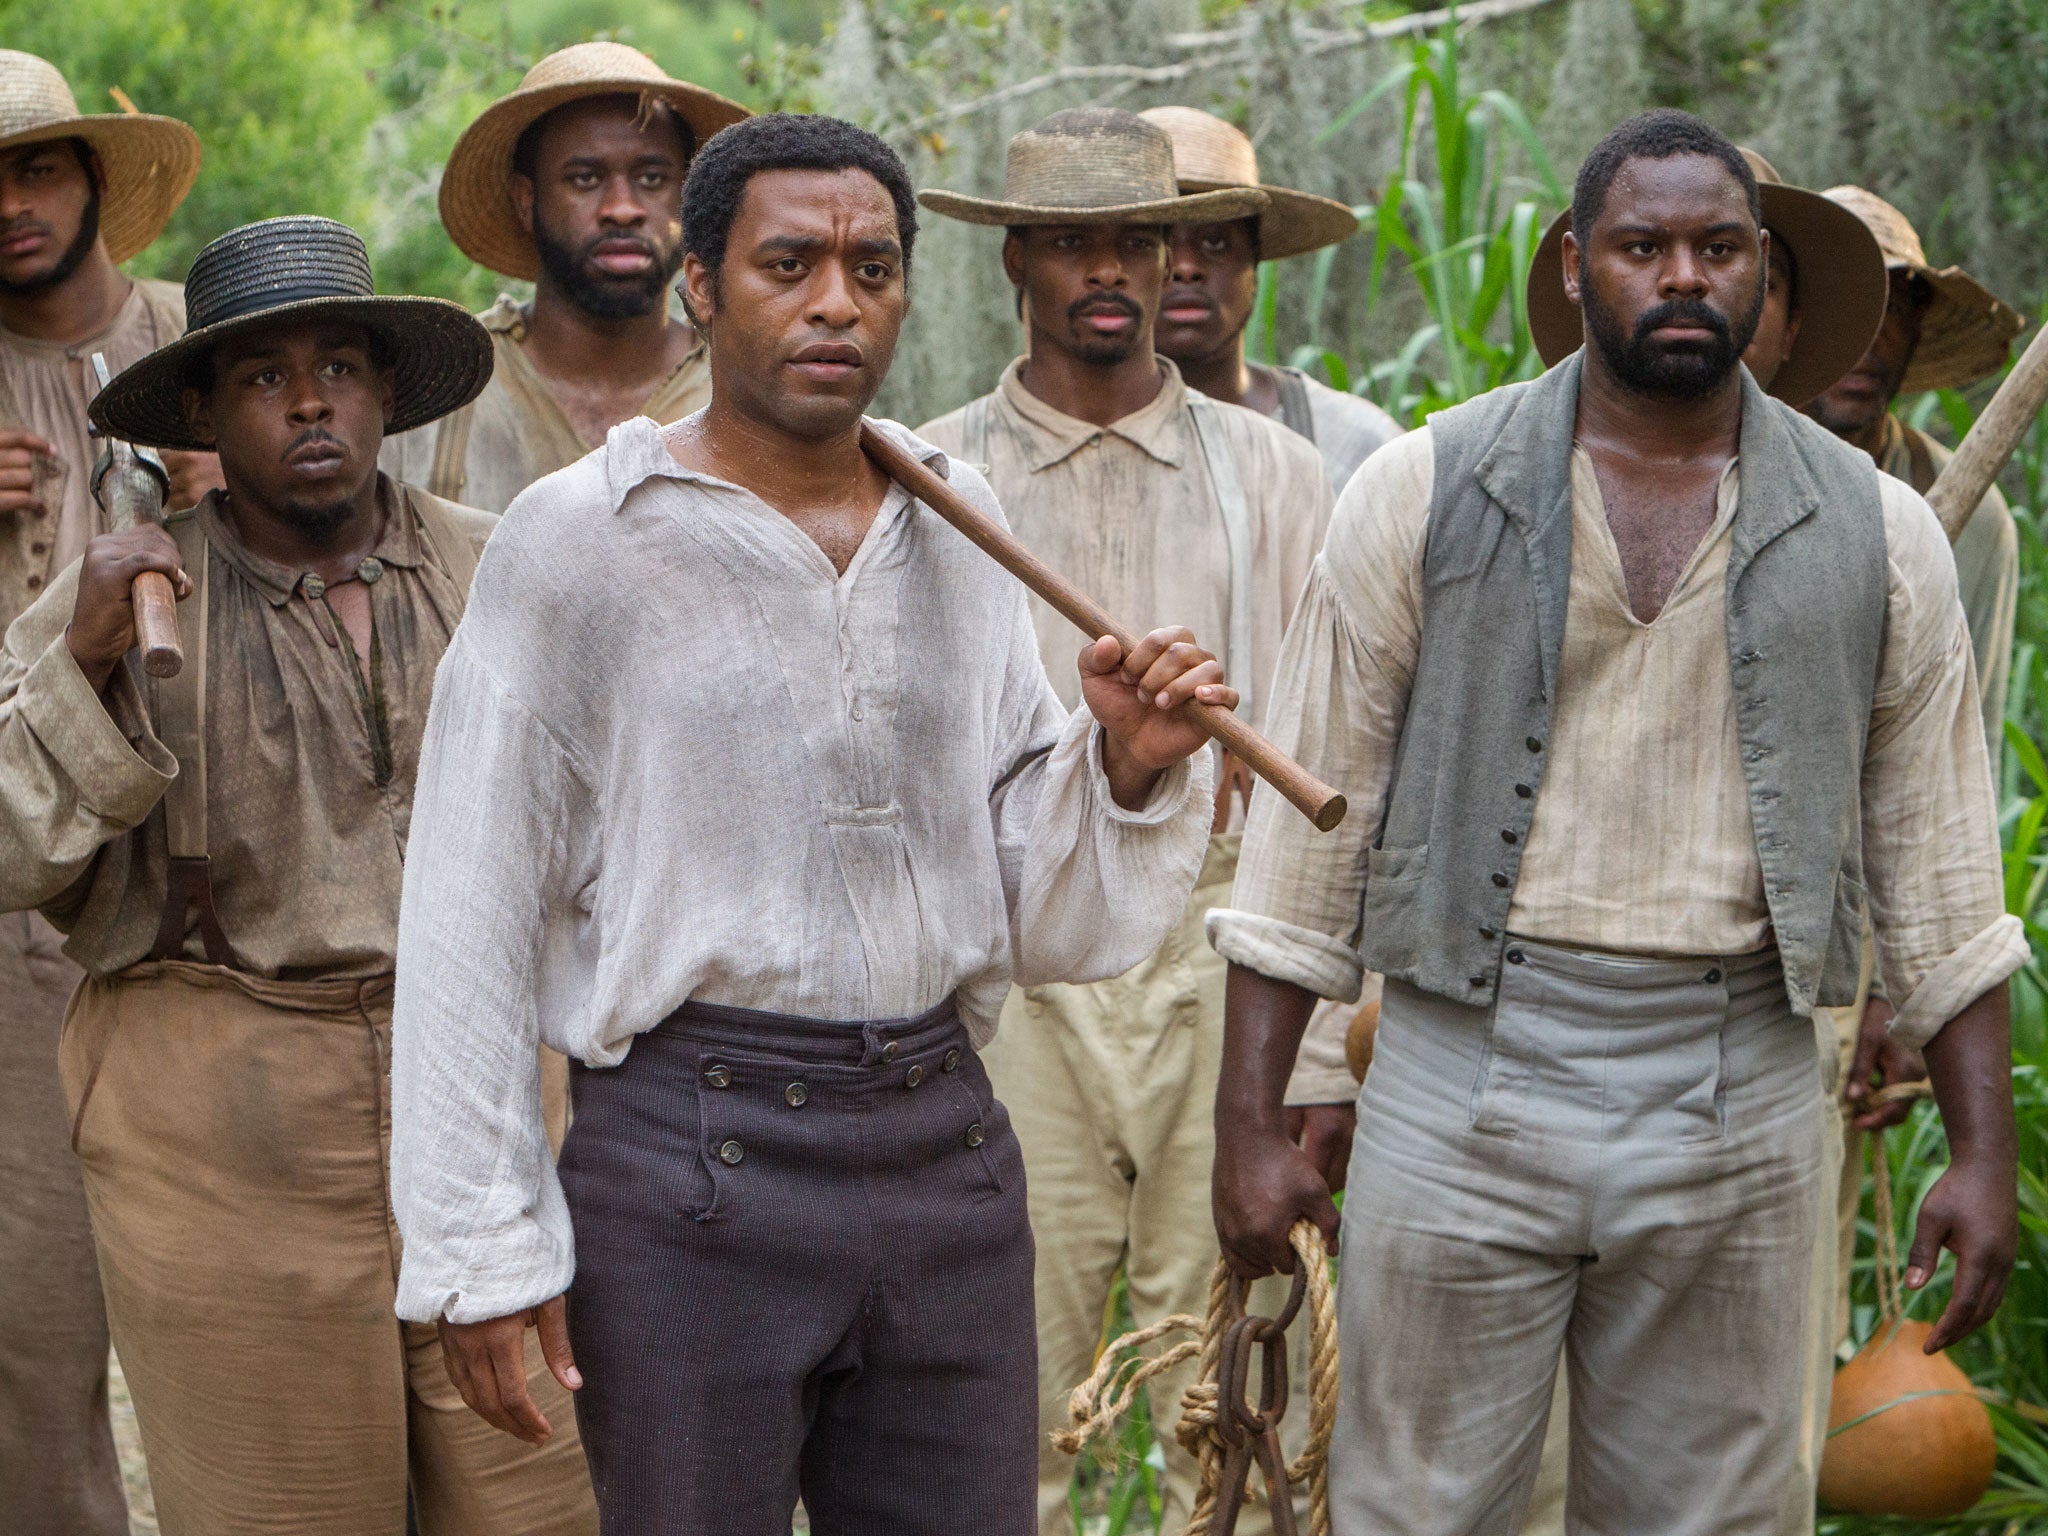 12 Years a Slave turns your mind to the present as well as the past